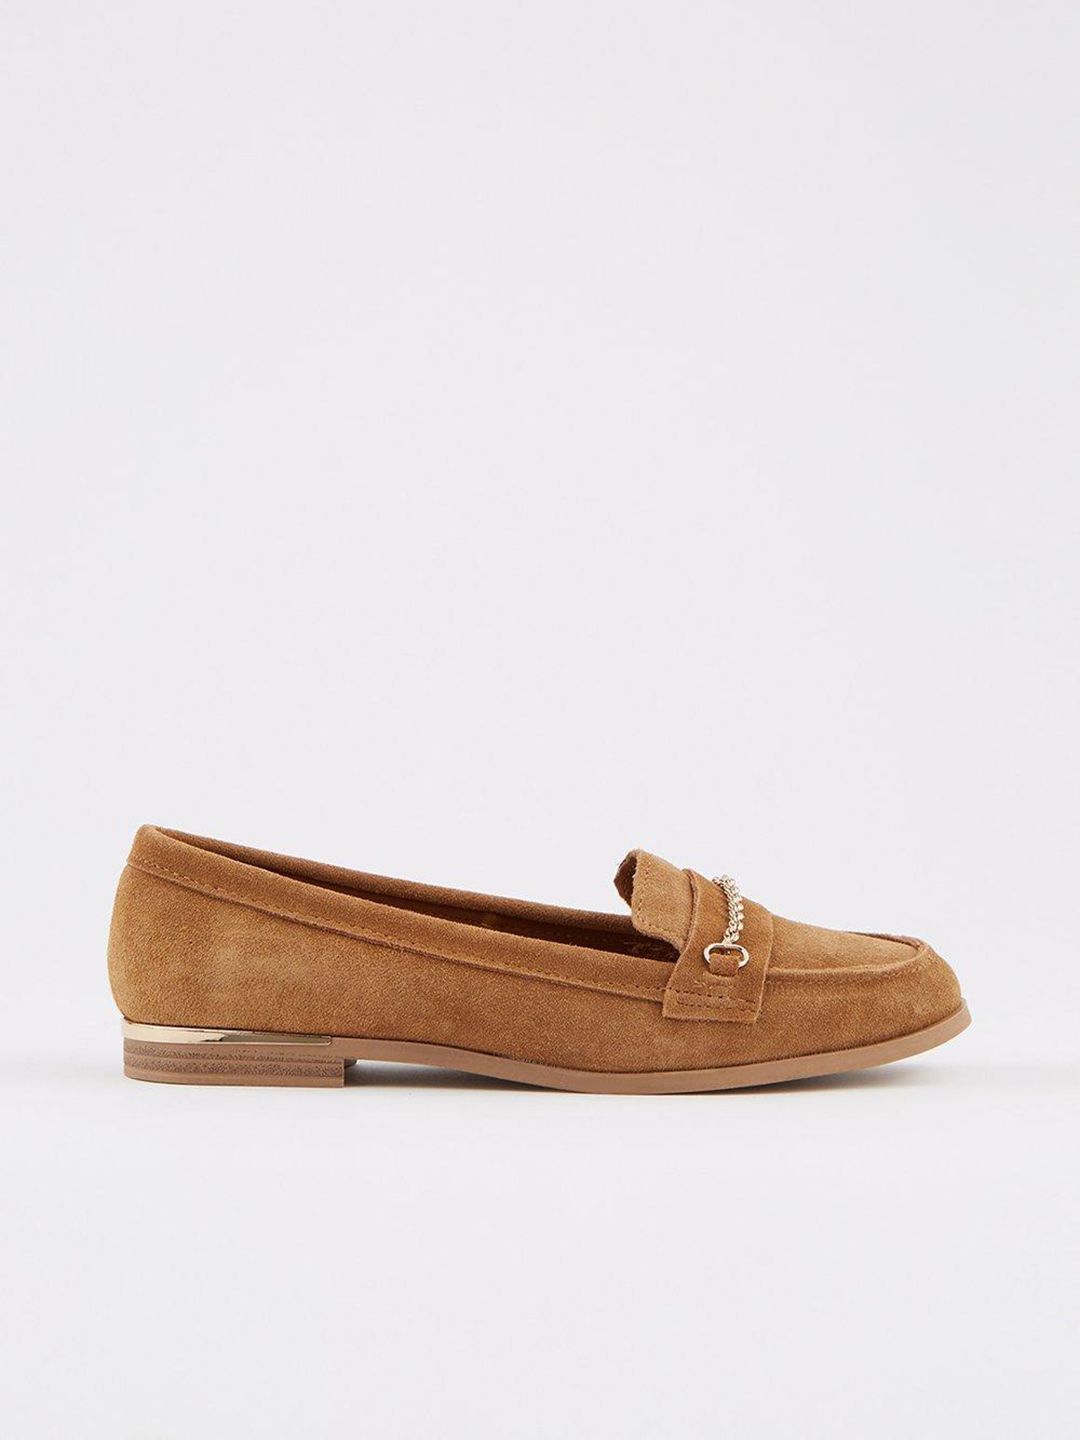 DOROTHY PERKINS Women Tan Leather Loafers Price in India